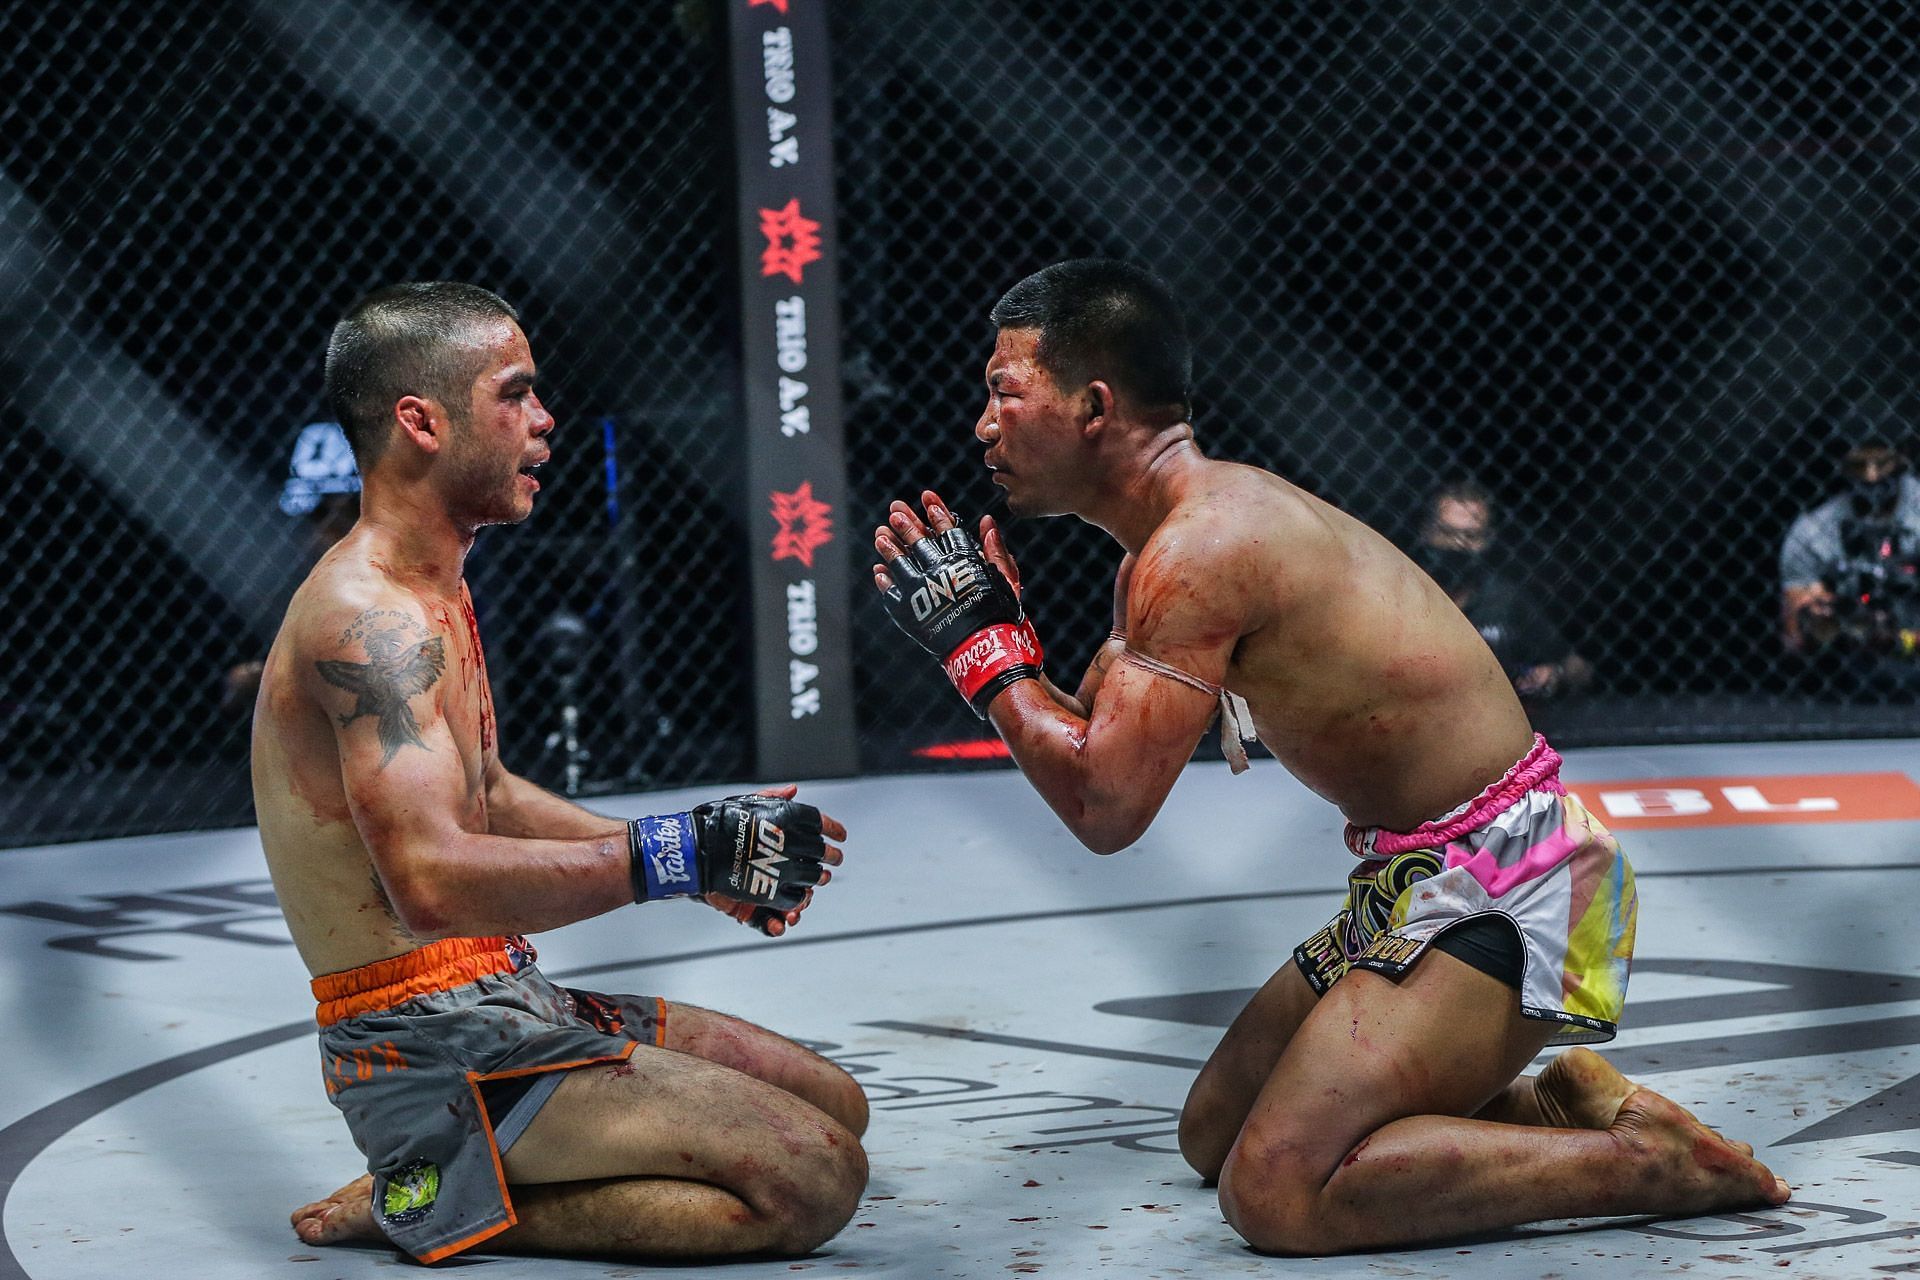 Daniel Williams (left) receives a show of respect from Rodtang Jitmuangnon (right) at ONE on TNT 1 [Photo Credit: ONE Championship]